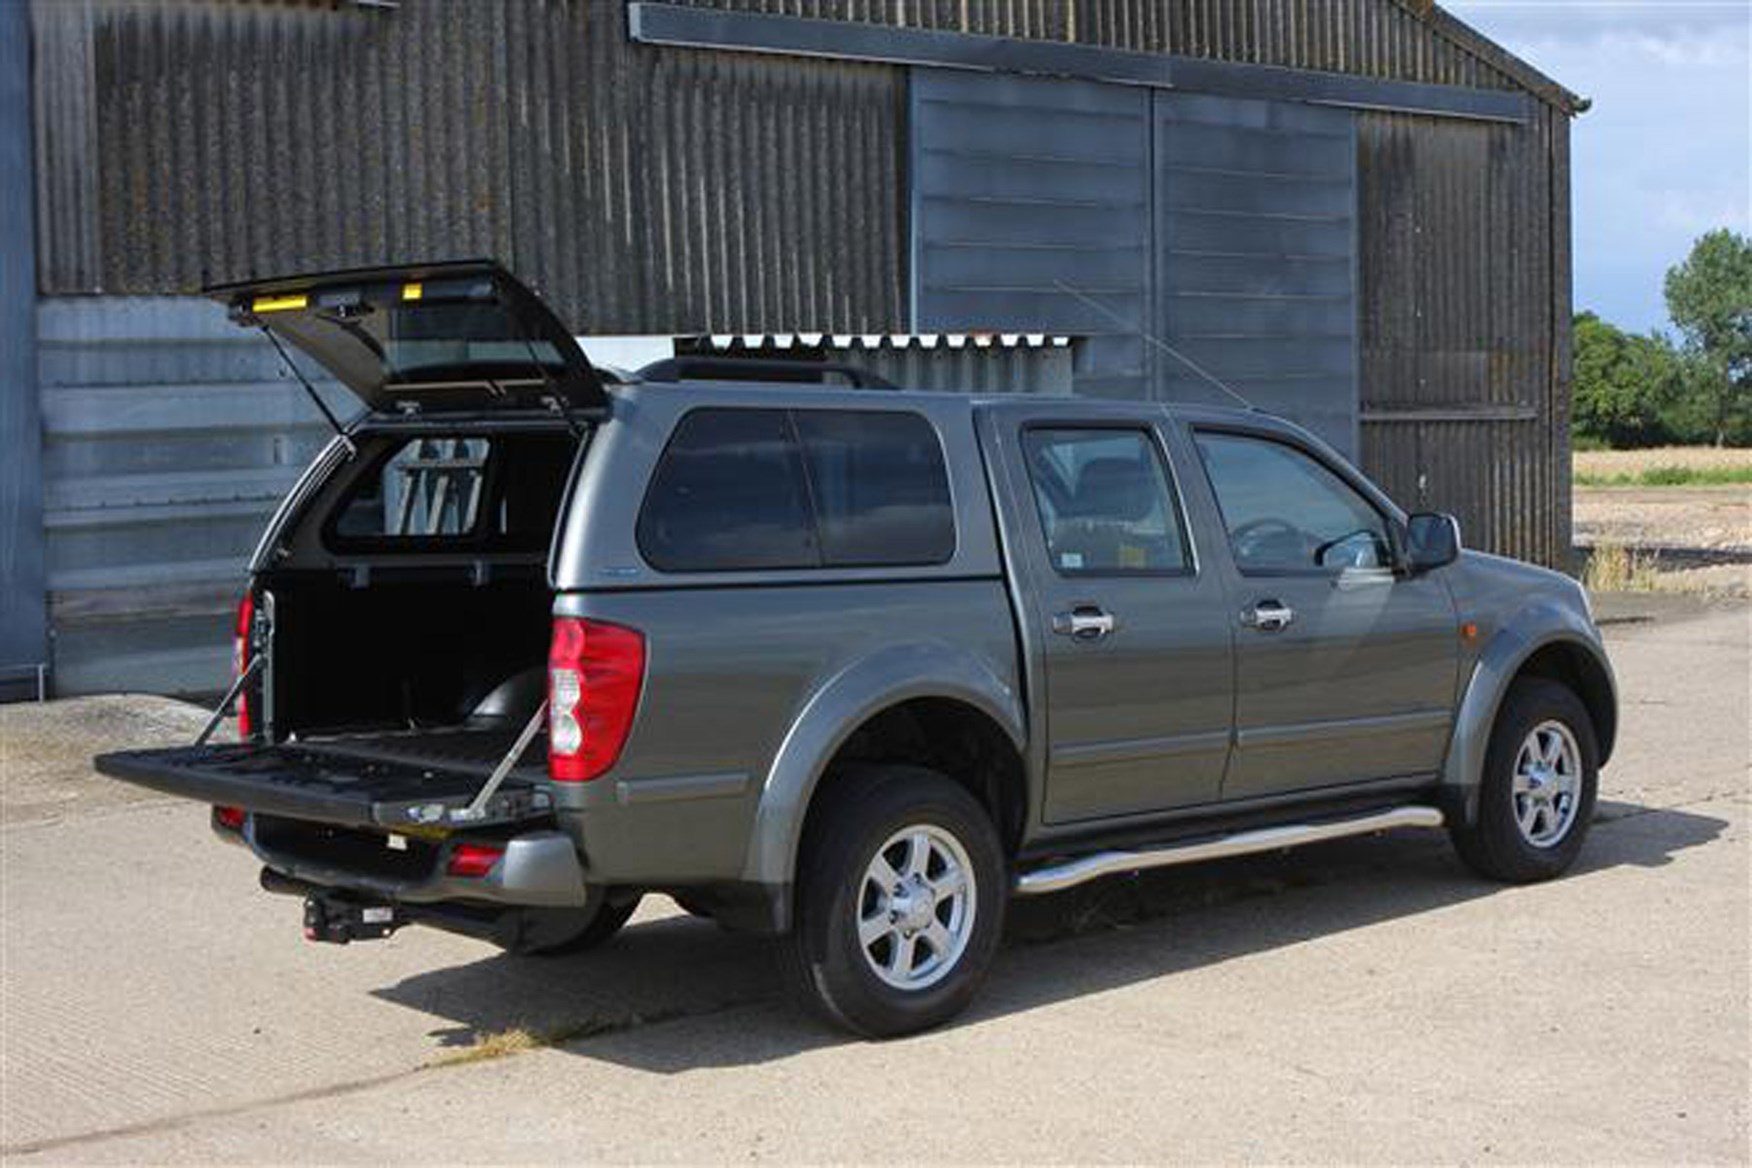 Great Wall Steed full review on Parkers Vans - dimensions and load area